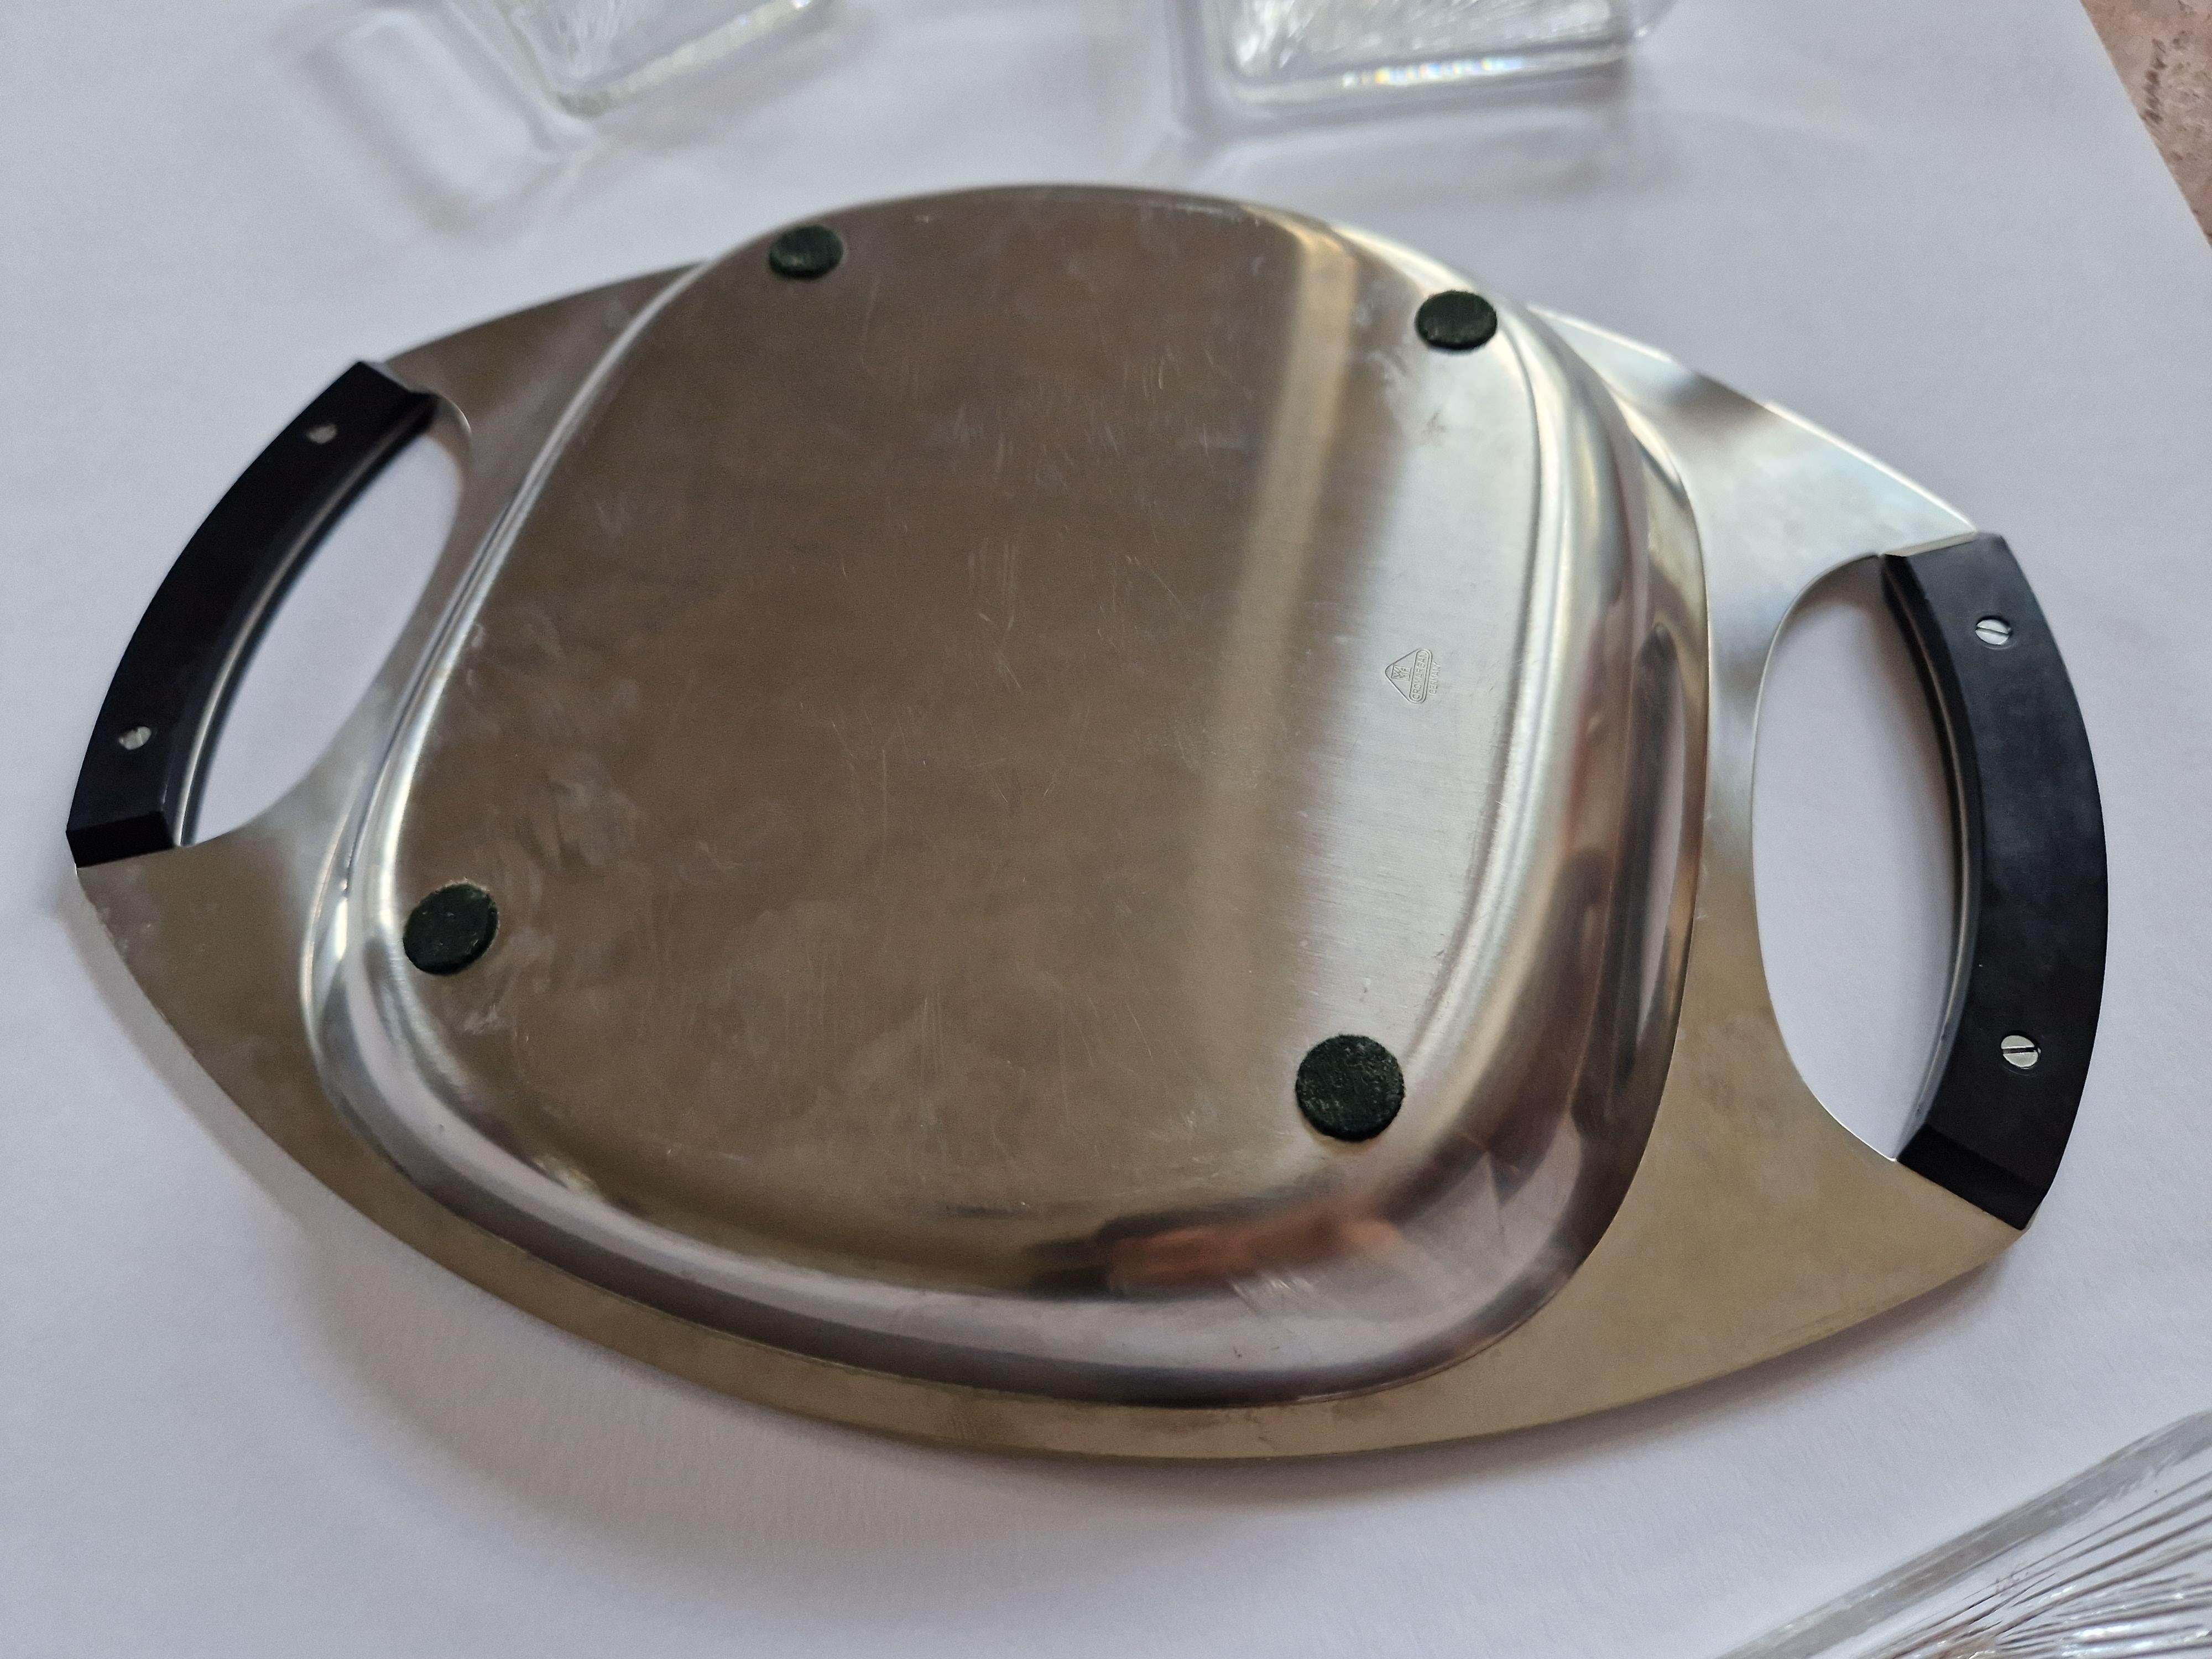 Midcentury Serving Plate Stainless Steel and Glass Cromargan, Germany, 1970s For Sale 5